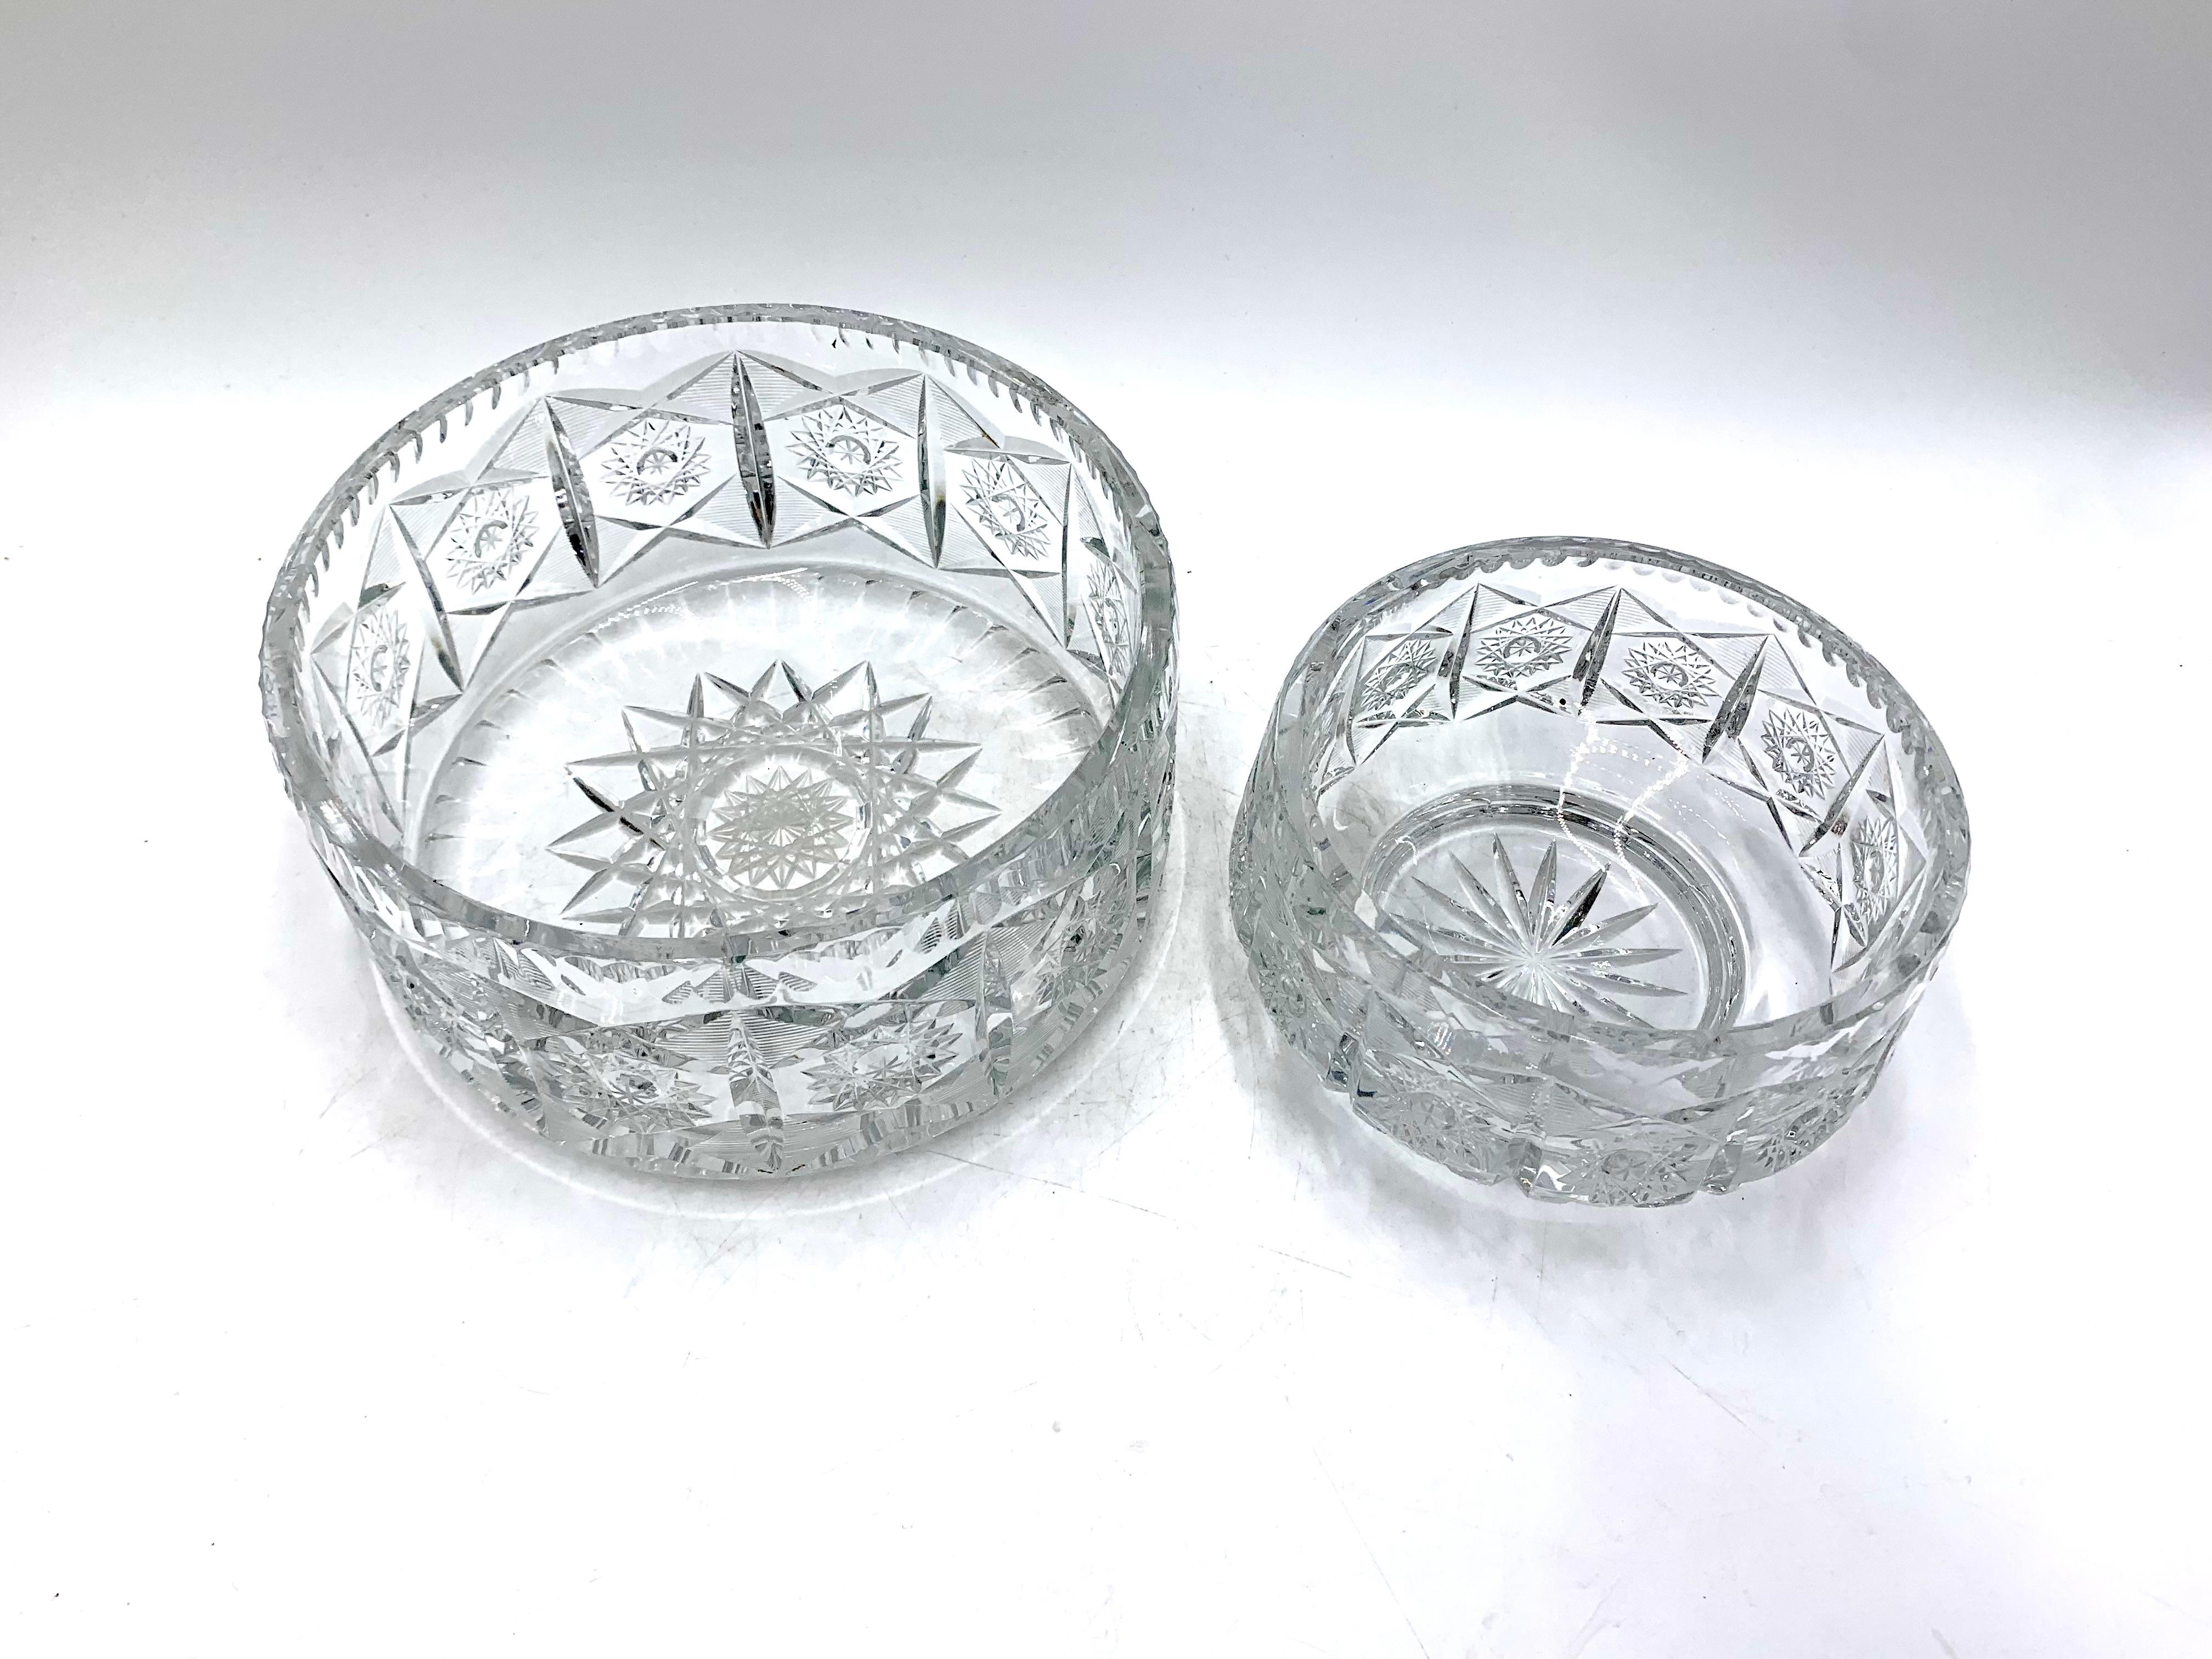 Two crystal clear decorative bowls with carvings.
Produced in Poland in 1950s.
Very good condition without damage.
bigger bowl : height : 10cm diameter : 20cm.
smaller bowl : height : 9cm diameter 14cm.